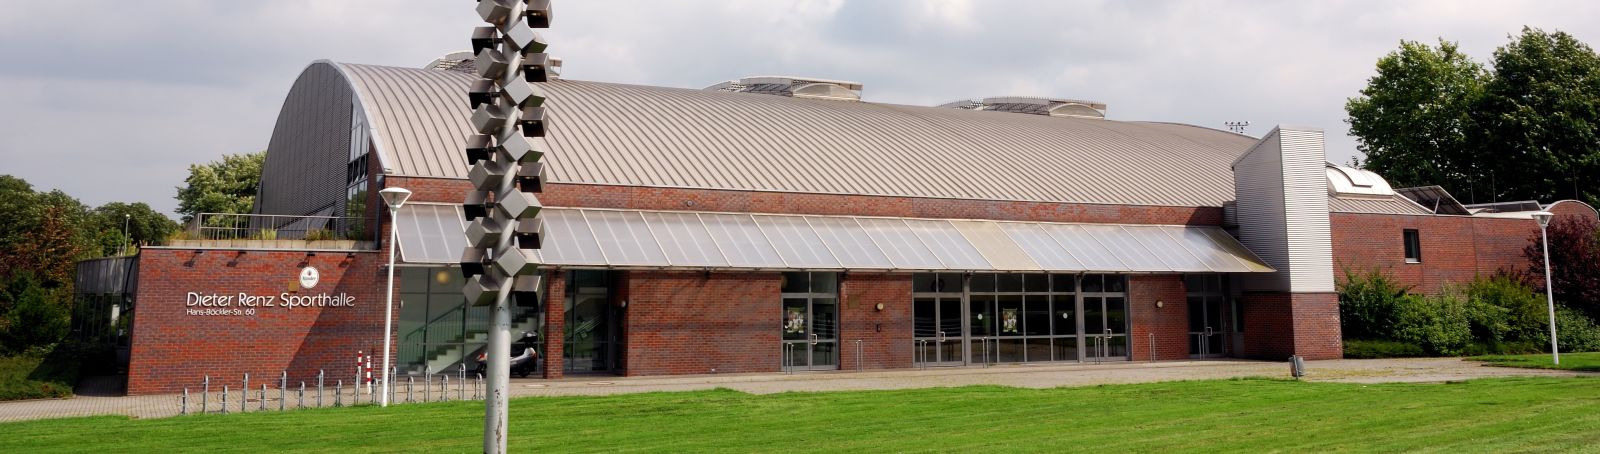 This sports hall in Bottrop is one of 25 public buildings in which the SUSTAIN2 researchers have installed their newly developed measuring system.